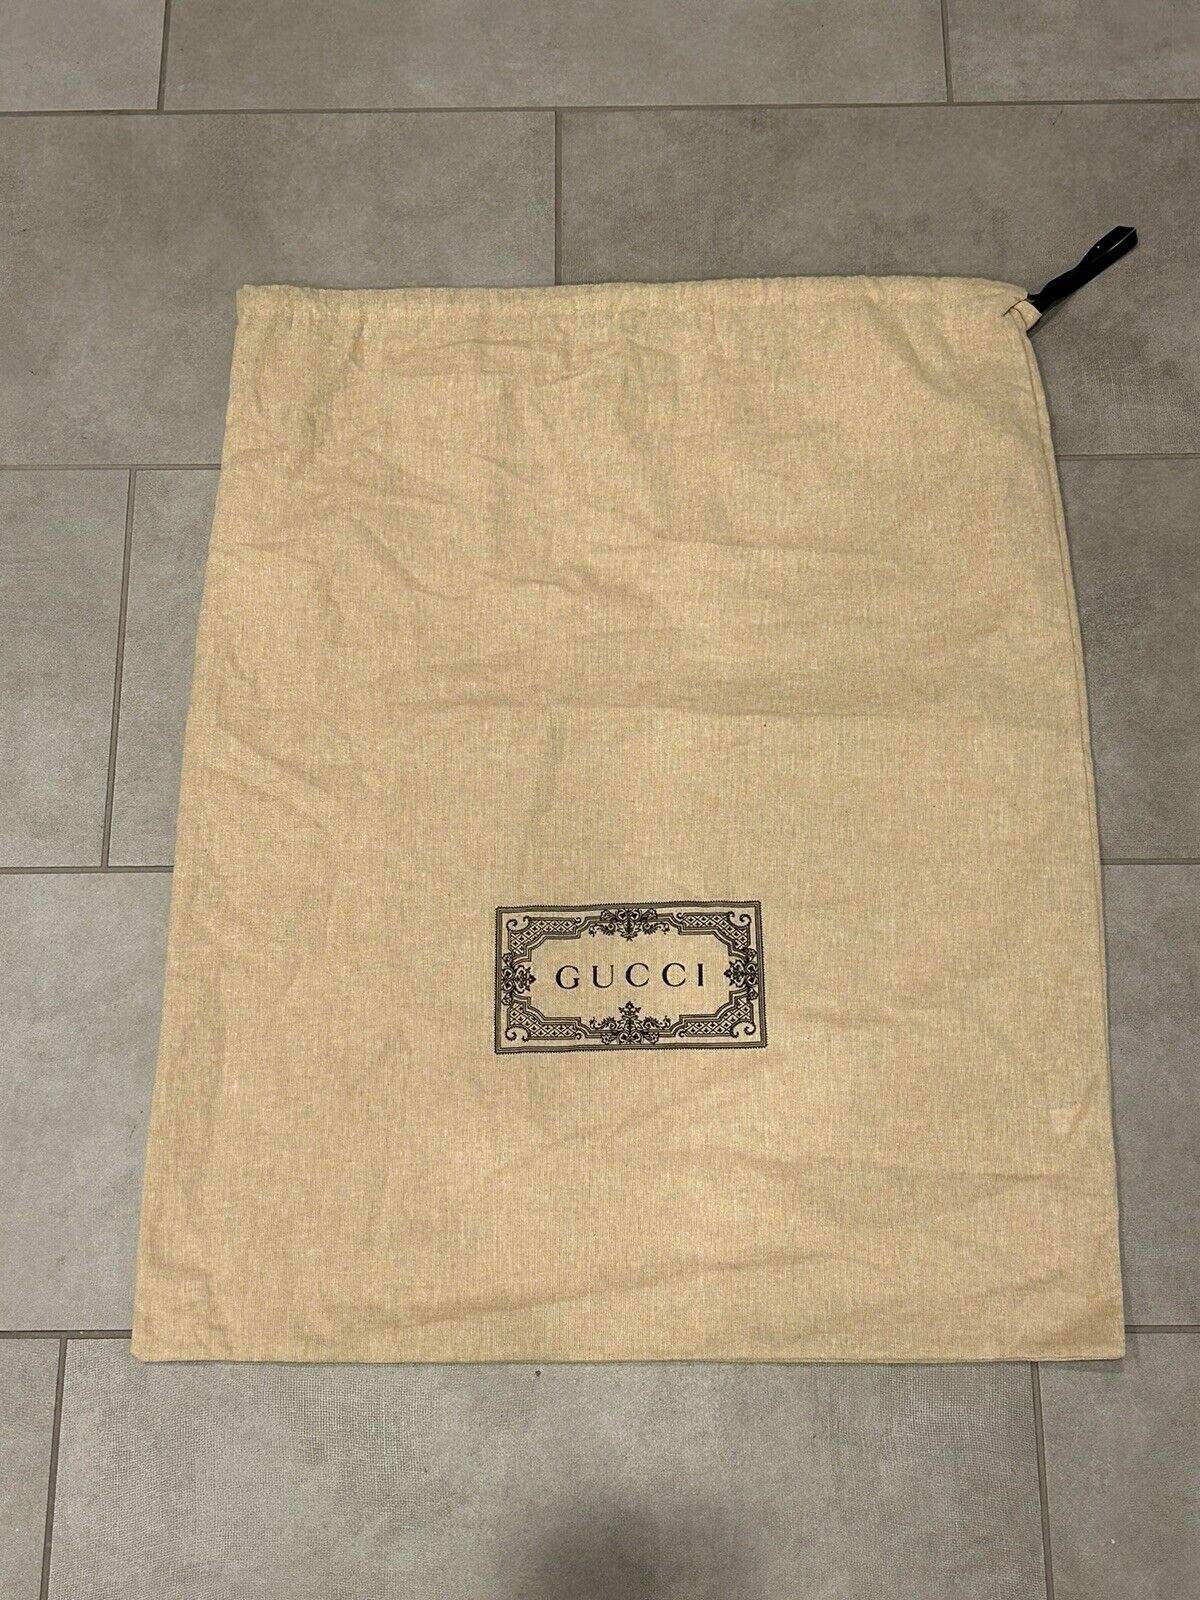 Authentic Gucci Large Size Dust Bag 23 X 30 Inches.  New Collection